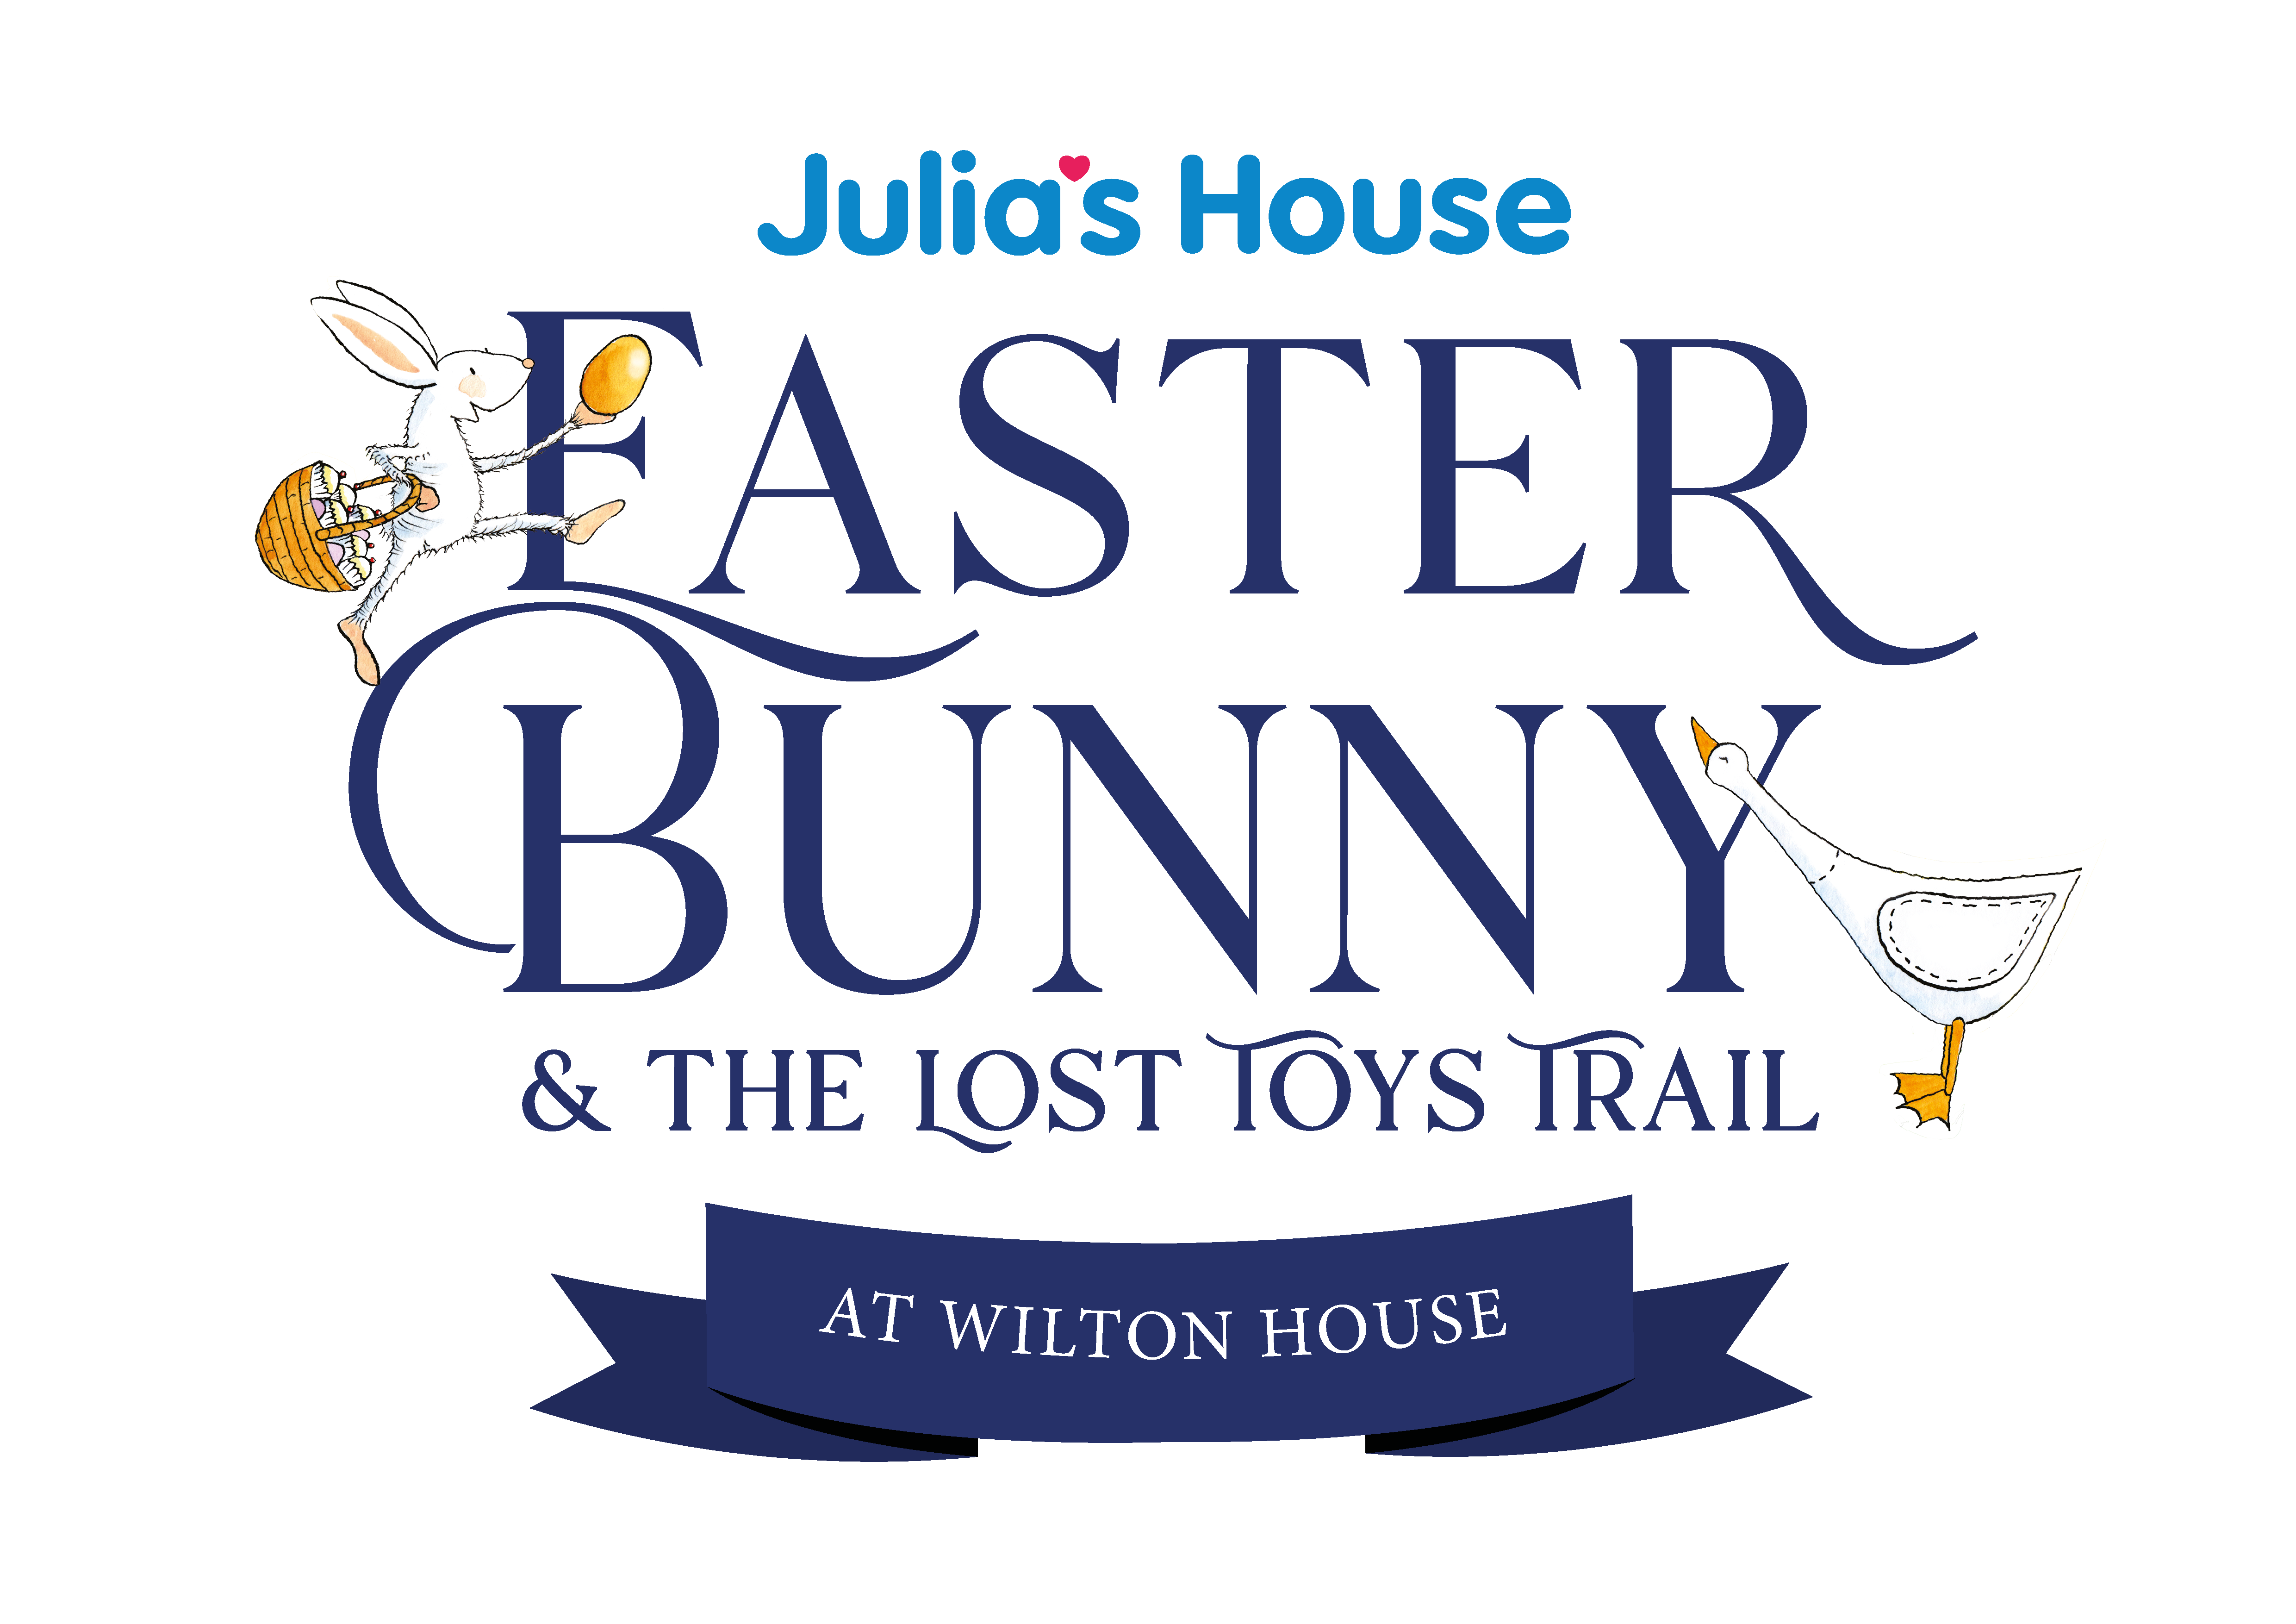 JULIA’S HOUSE LAUNCHES EASTER BUNNY AND THE LOST TOYS TRAIL AT WILTON HOUSE